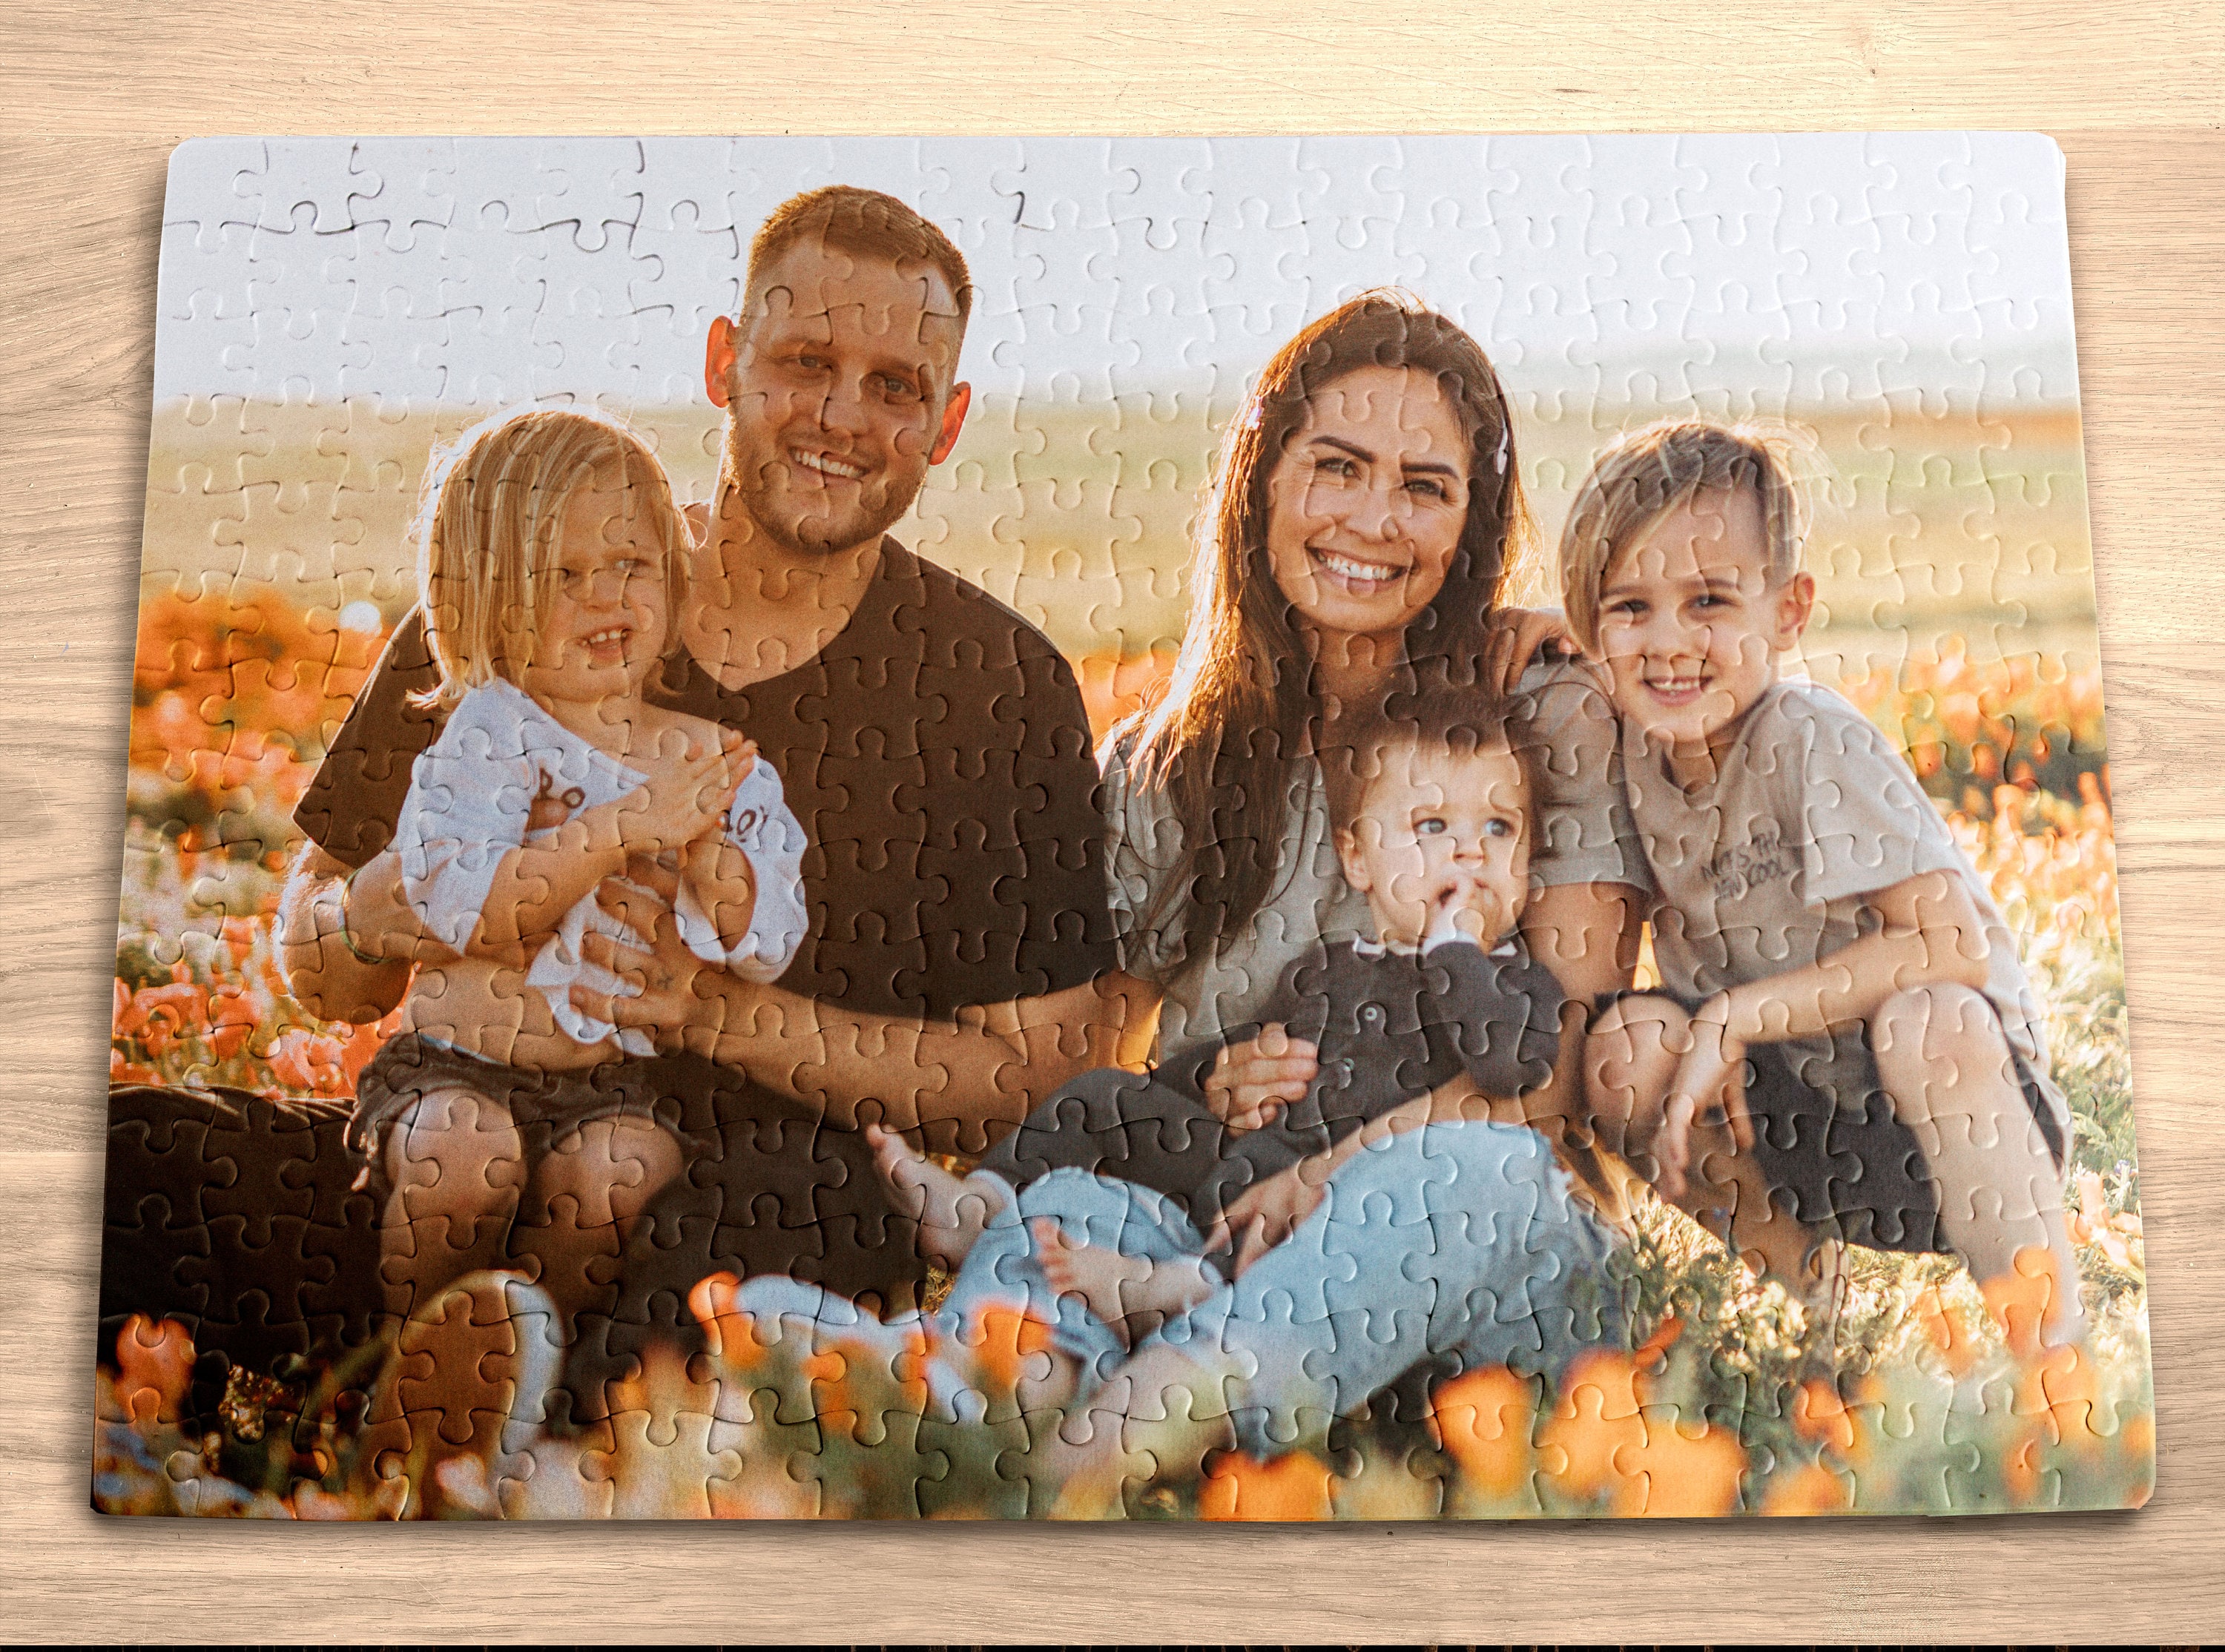 Pet Portrait for Toddlers Kids Personalized Jigsaw Puzzles with Your Photo&Text Adults Girls Kids Boredom Buster Activity Boys Toys Gift Custom Puzzle 1000 Piece Family Photo Gift 